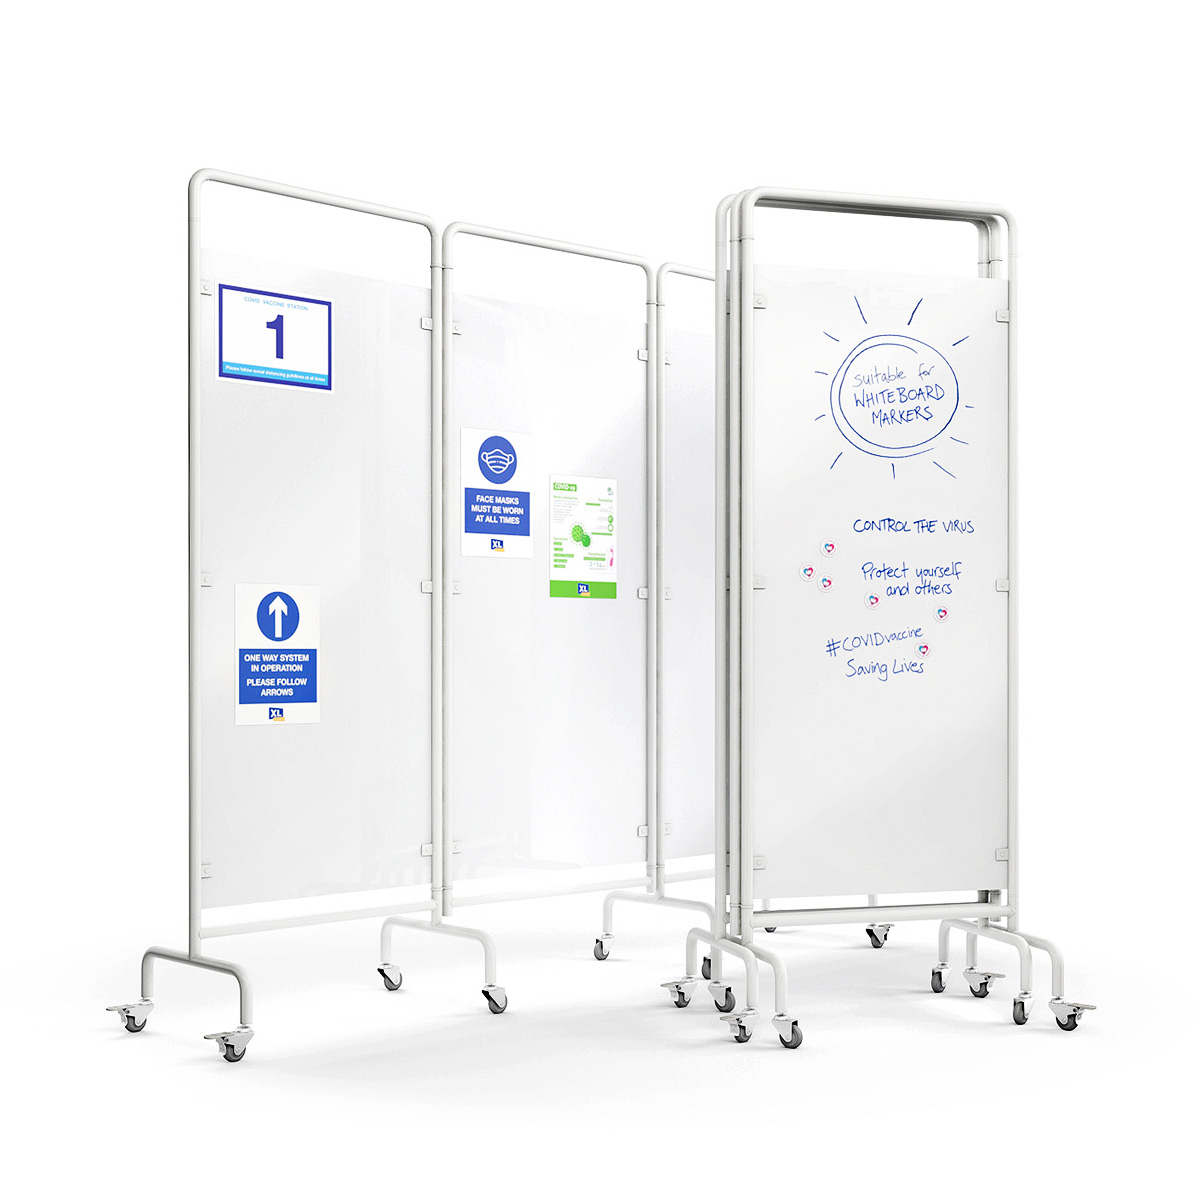 DIGNITY® Portable Medical Screens Can Act As Folding Whiteboards For Writing Medical Notes